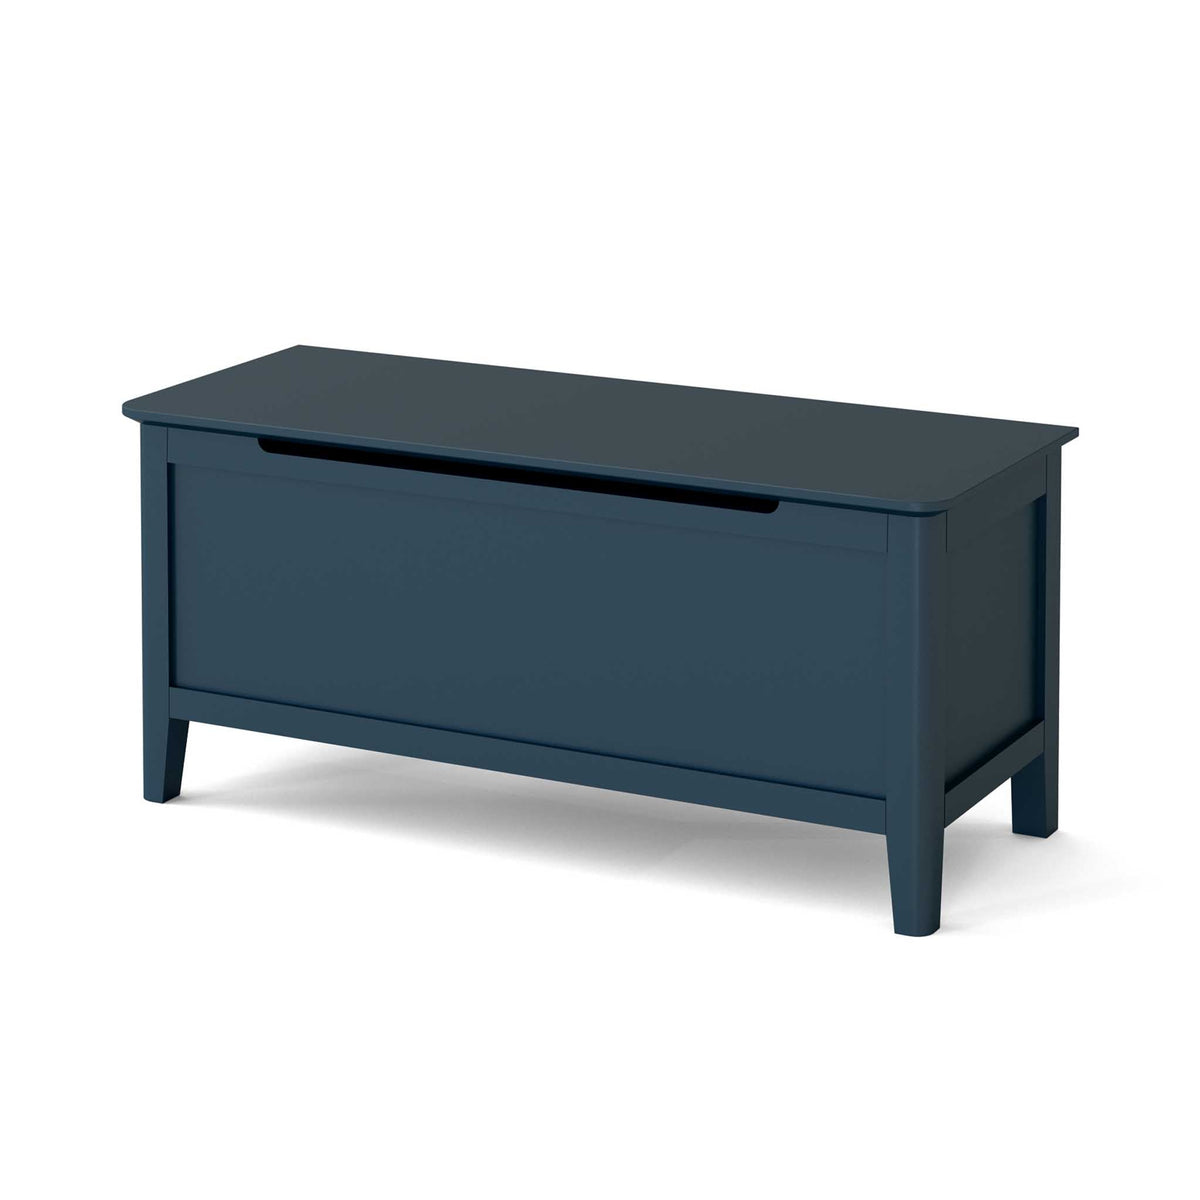 Stirling Blue Blanket Box Ottoman Chest from Roseland Furniture